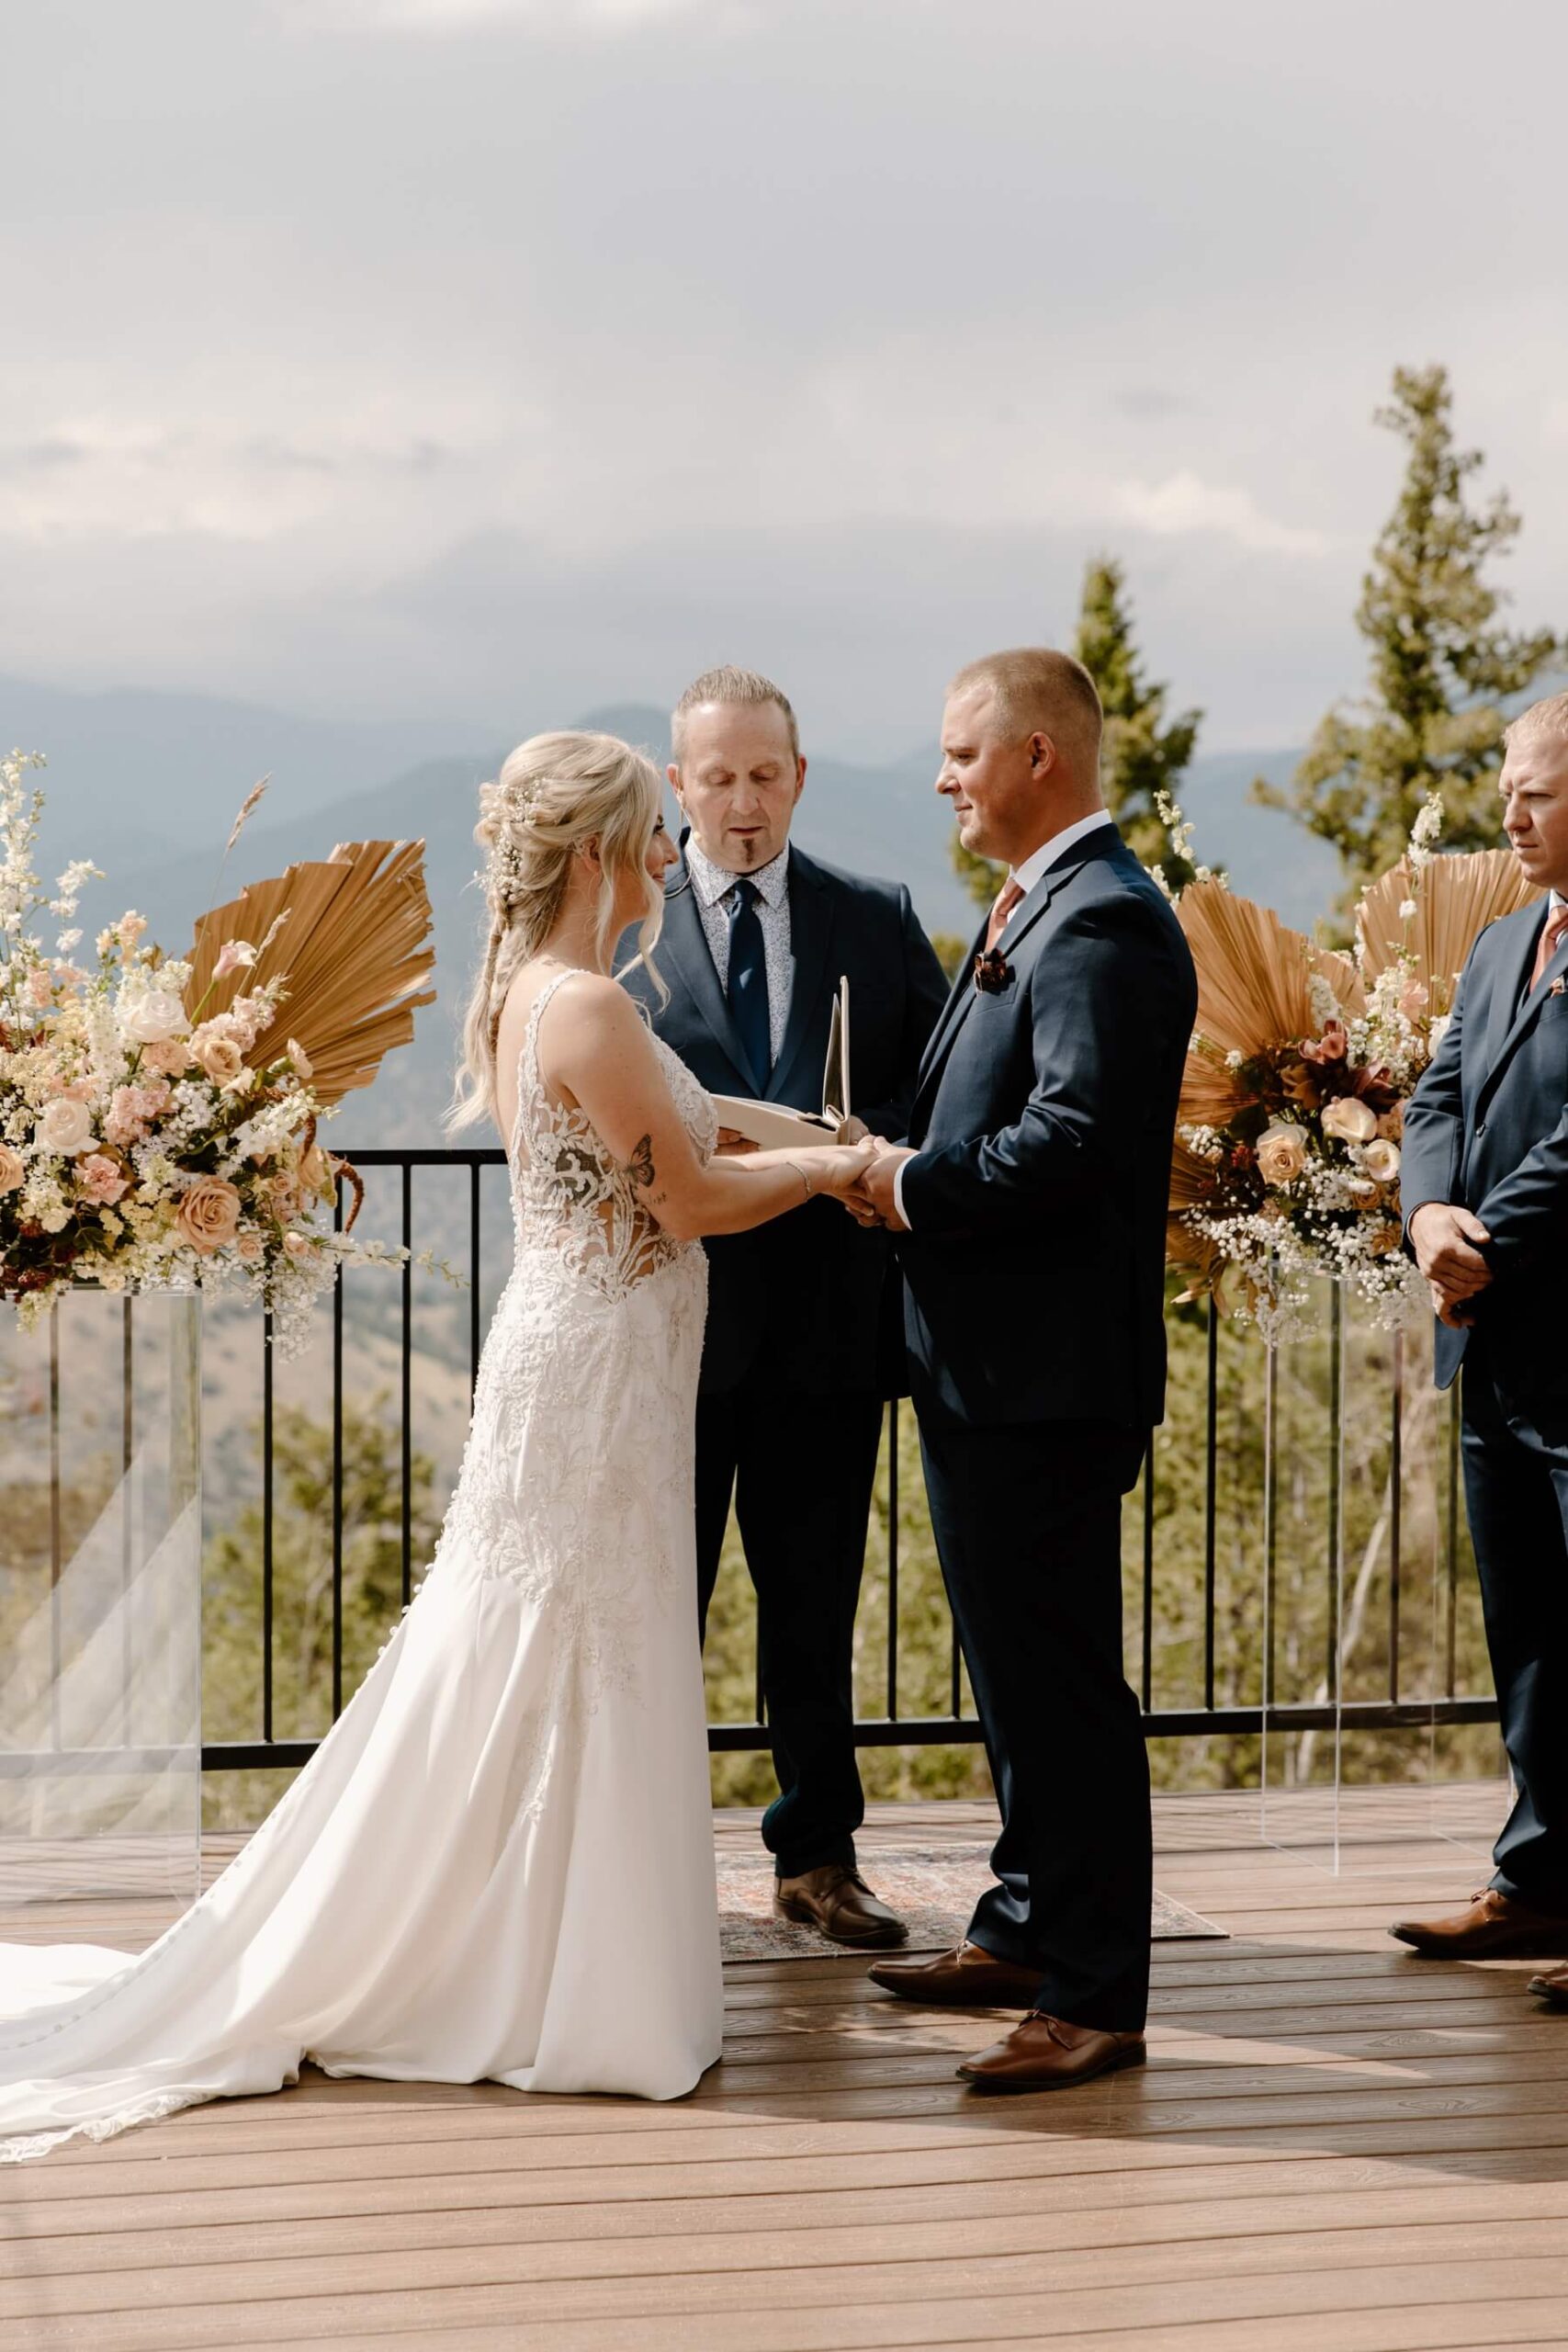 Bride and groom holding hands at altar during ceremony at North Star Gatherings | McArthur Weddings and Events